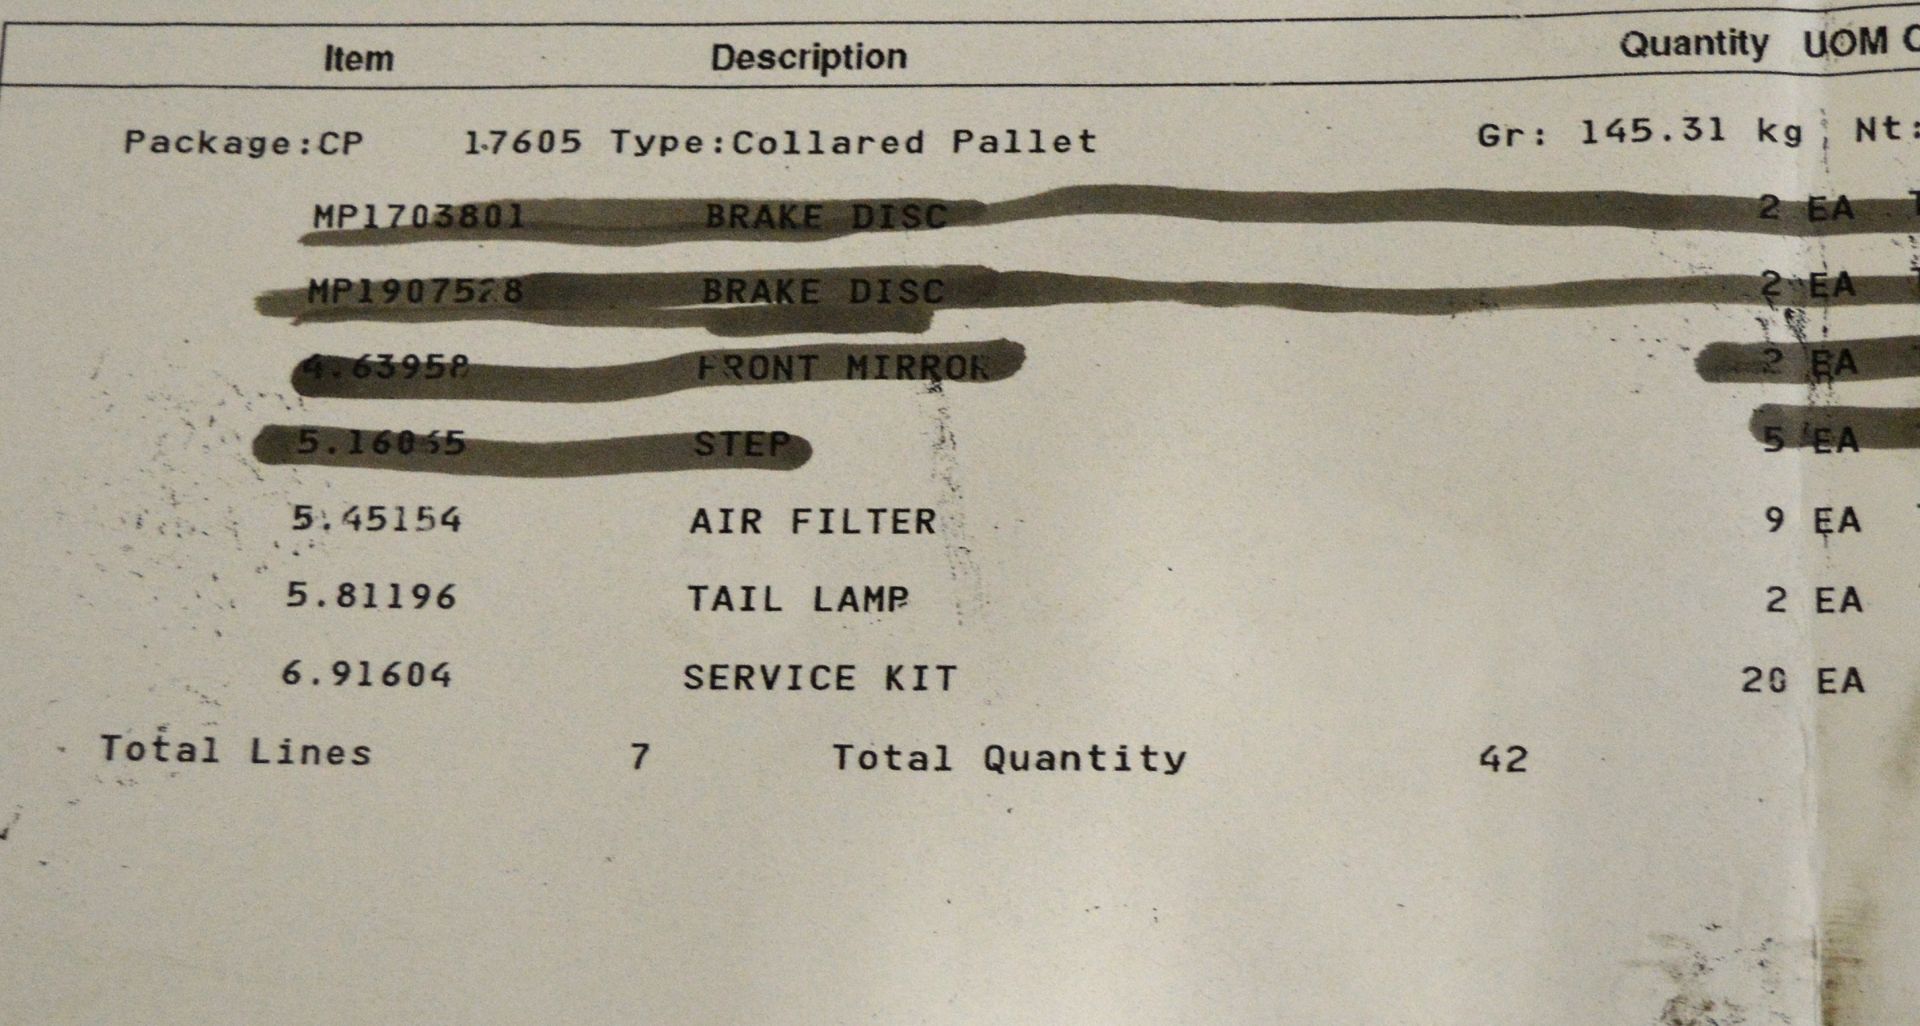 Vehicle parts - air filters, tail lamp service kit - see picture for itinerary for model n - Image 5 of 5